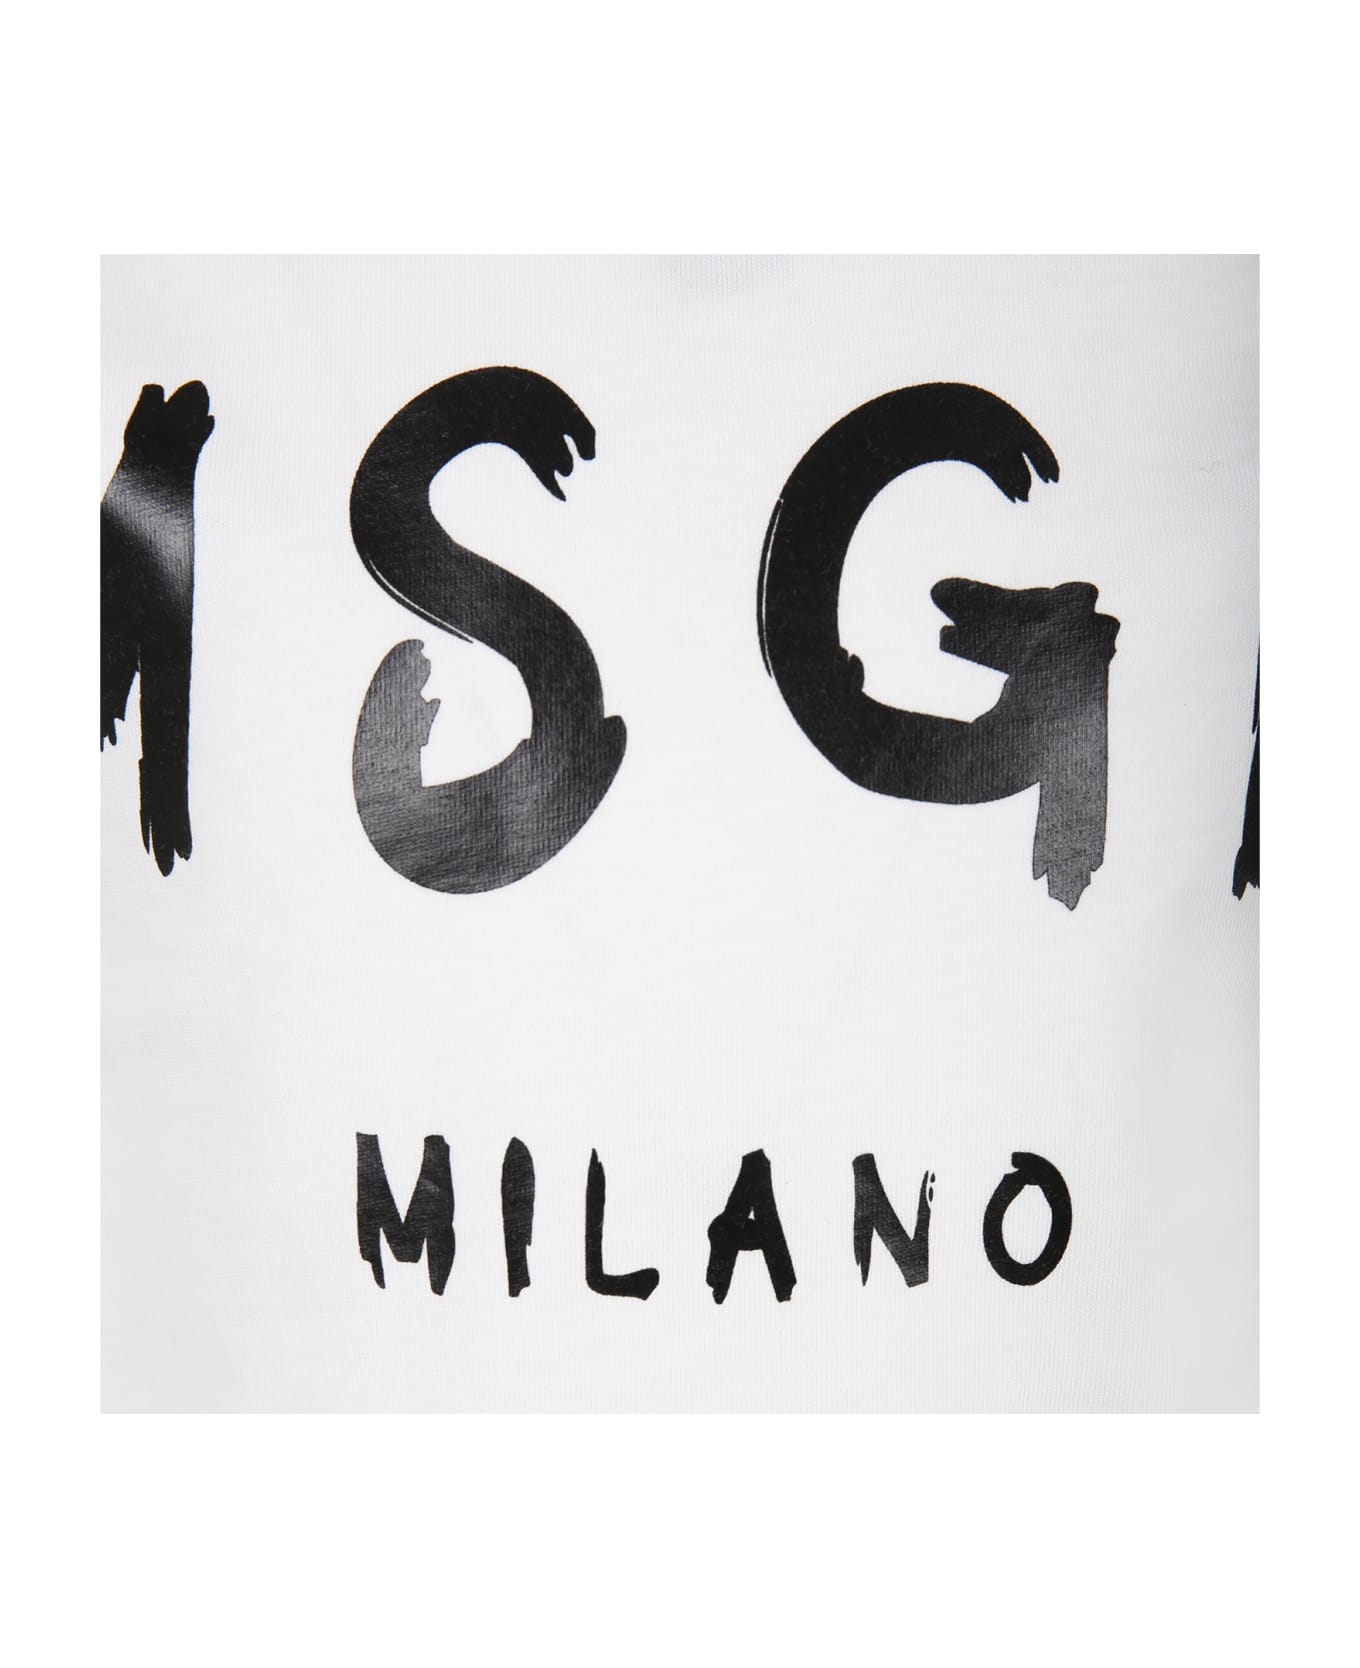 MSGM White T-shirt For Kids With Logo